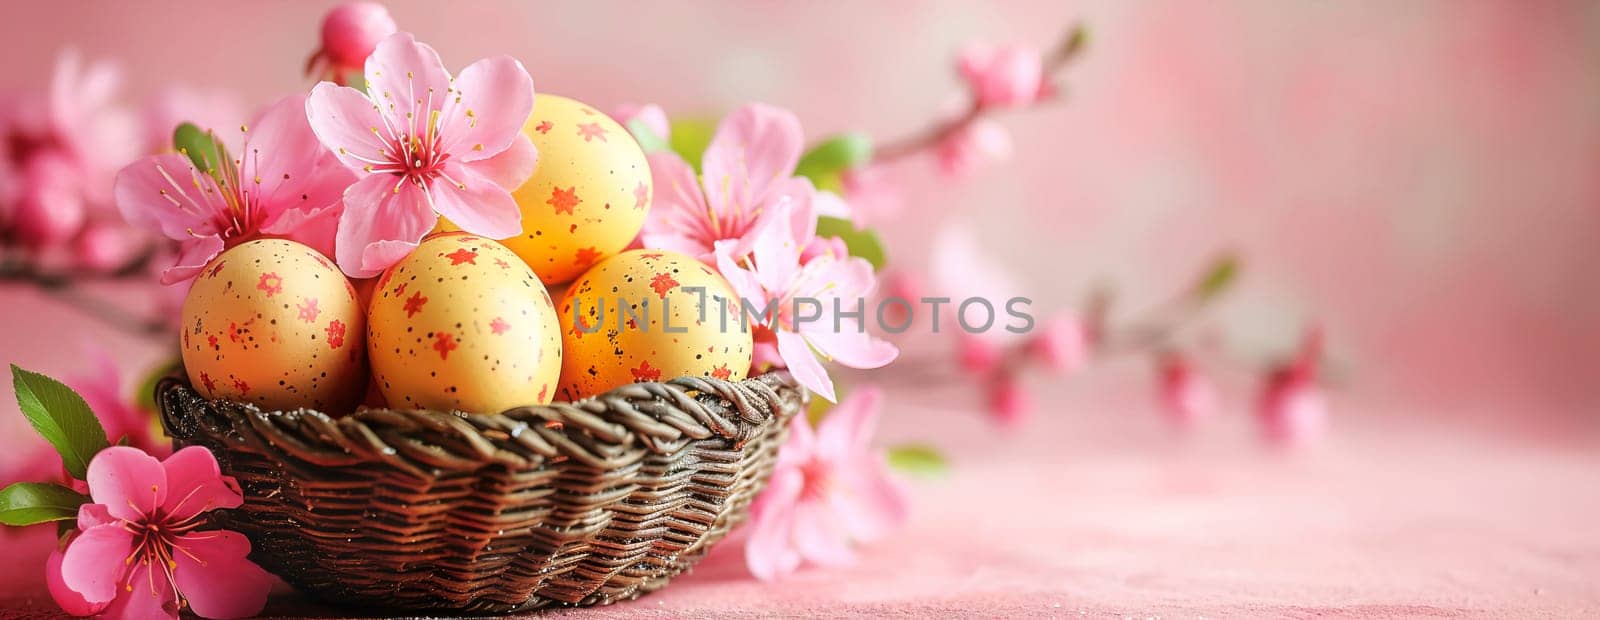 Easter holiday celebration banner greeting card banner with easter eggs and flowers on a pink background.